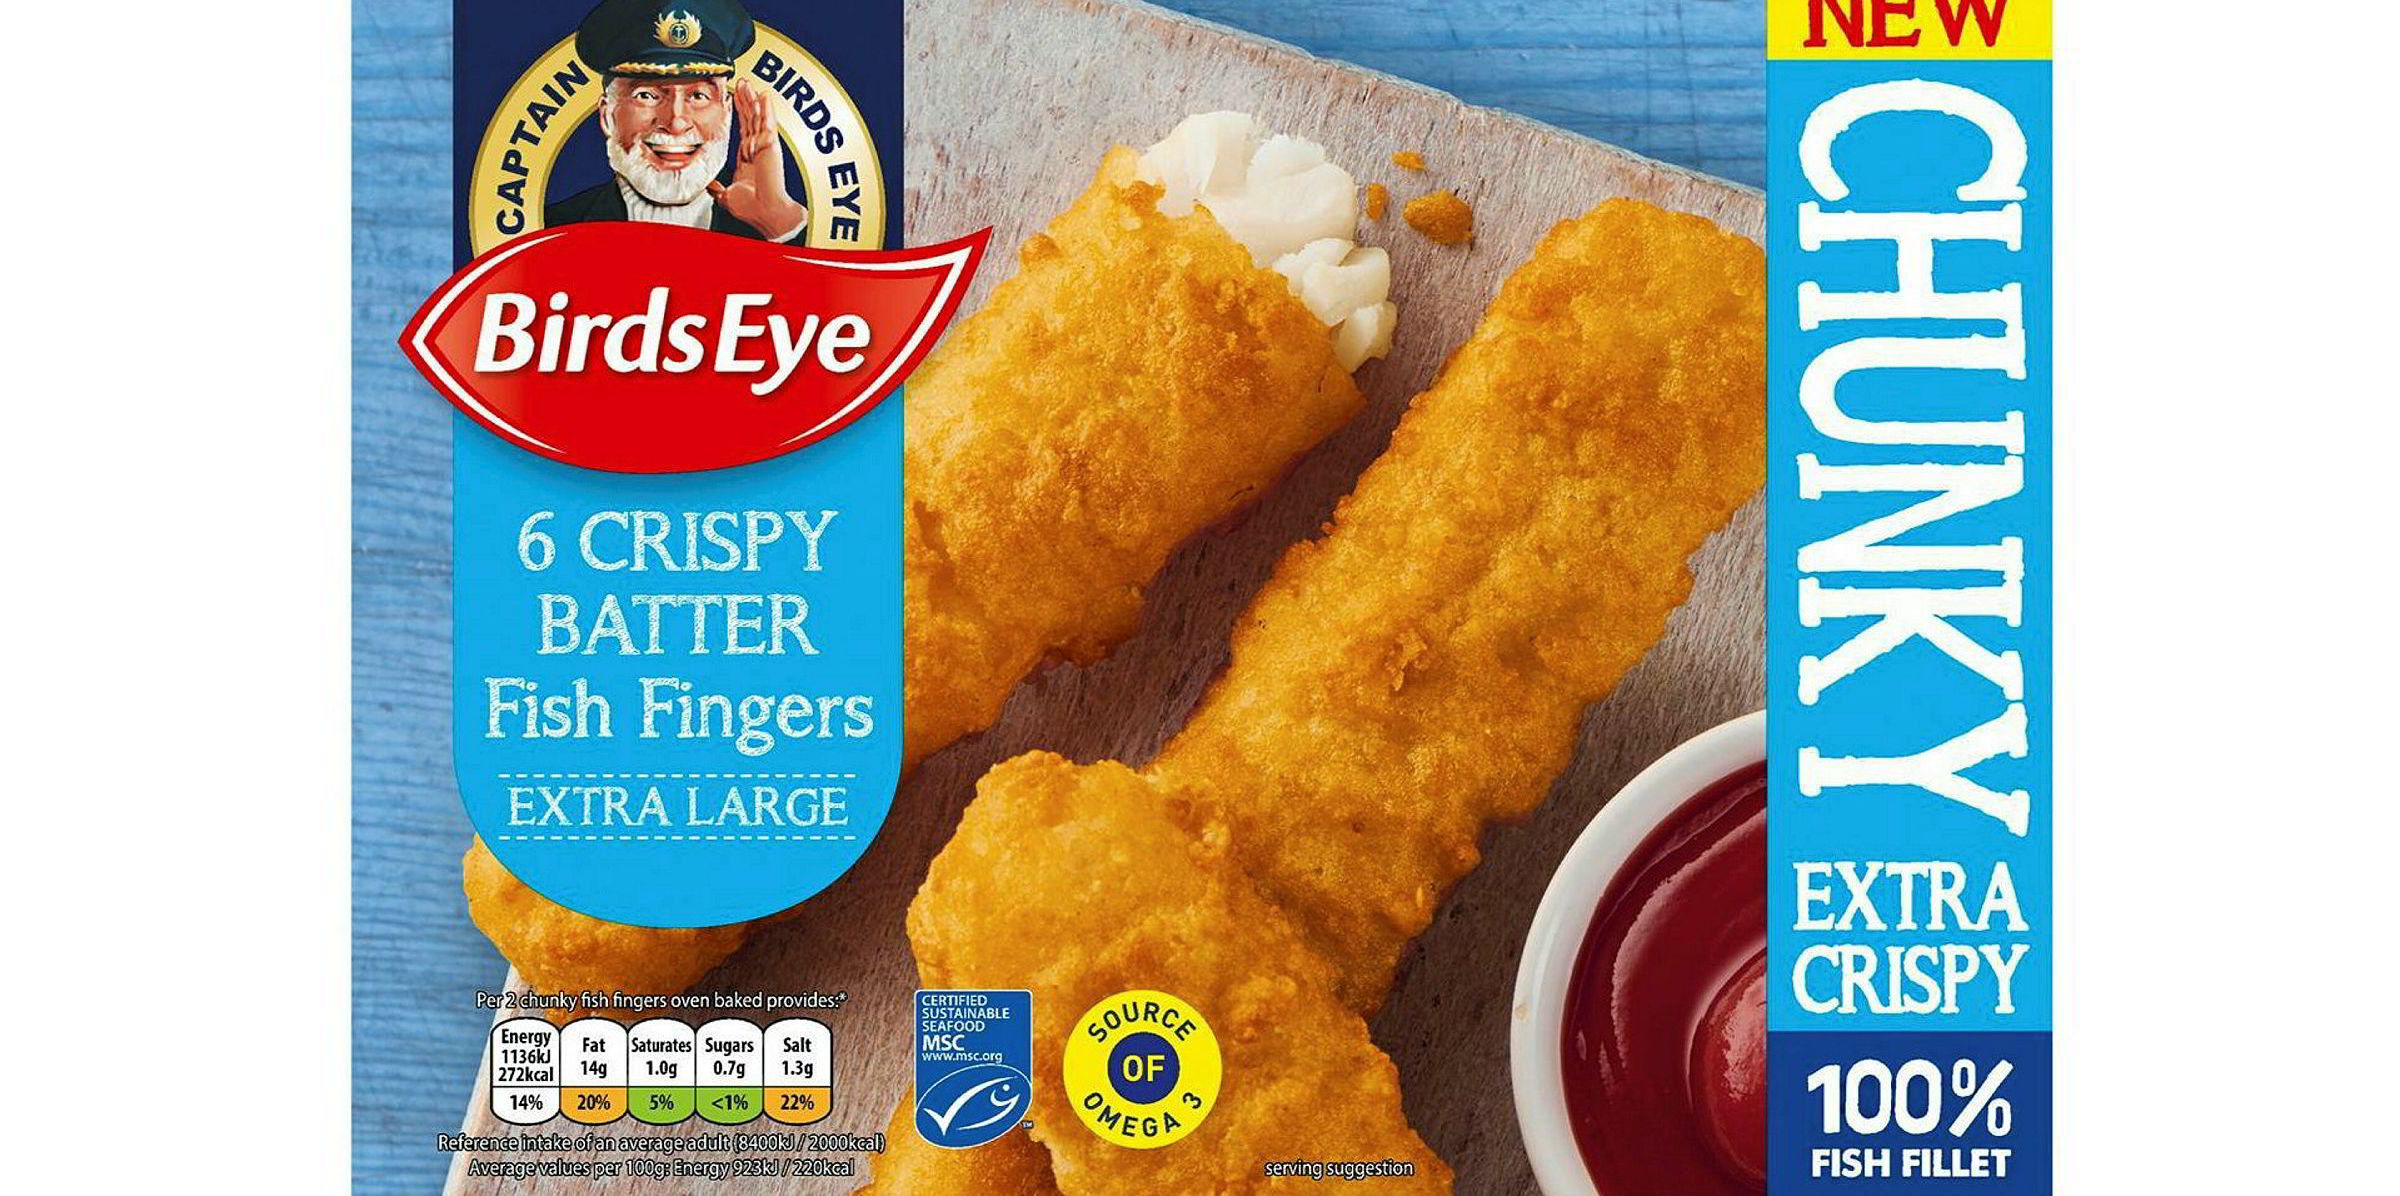 Birds Eye capitalizes on frozen foods explosion with new fish